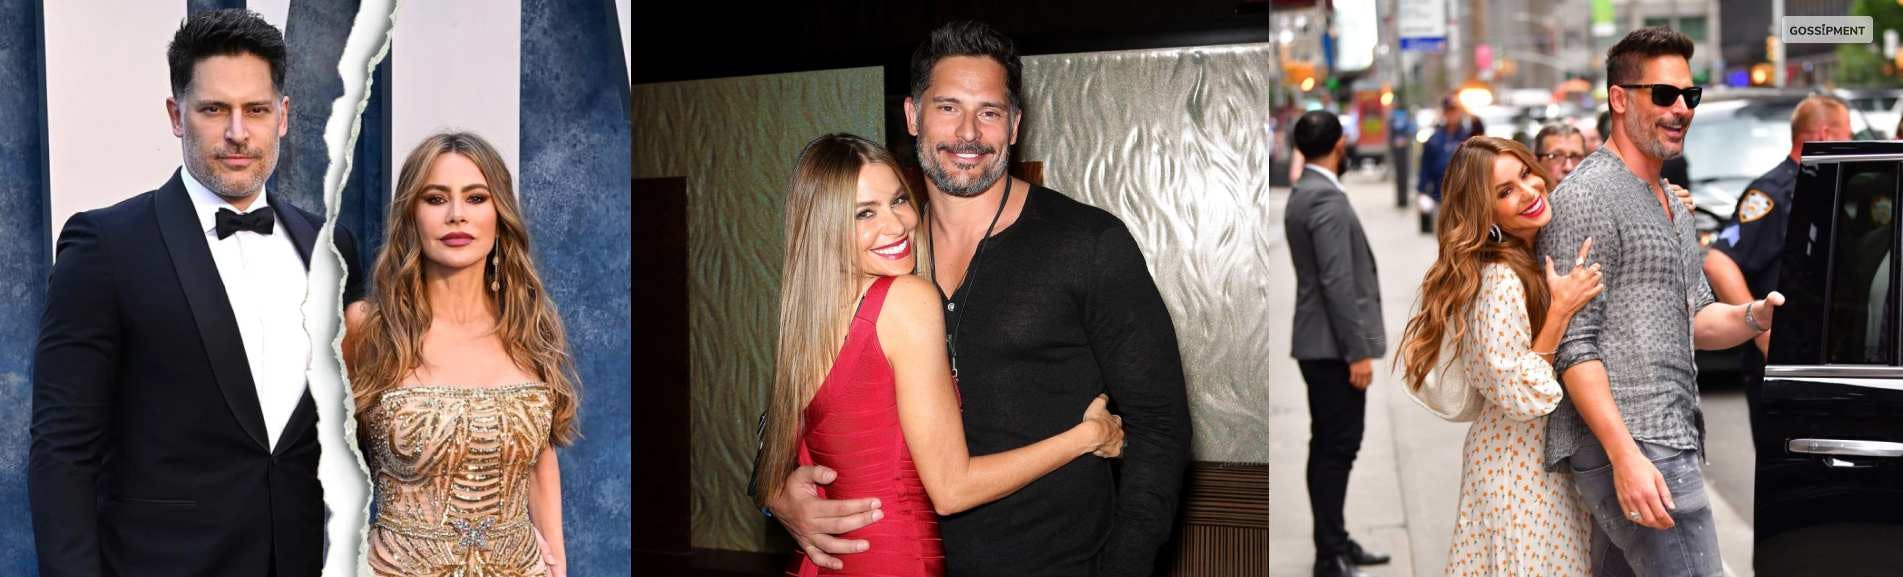 Cover Image for Sofía Vergara And Joe Manganiello’s Divorce: Who’s Getting What